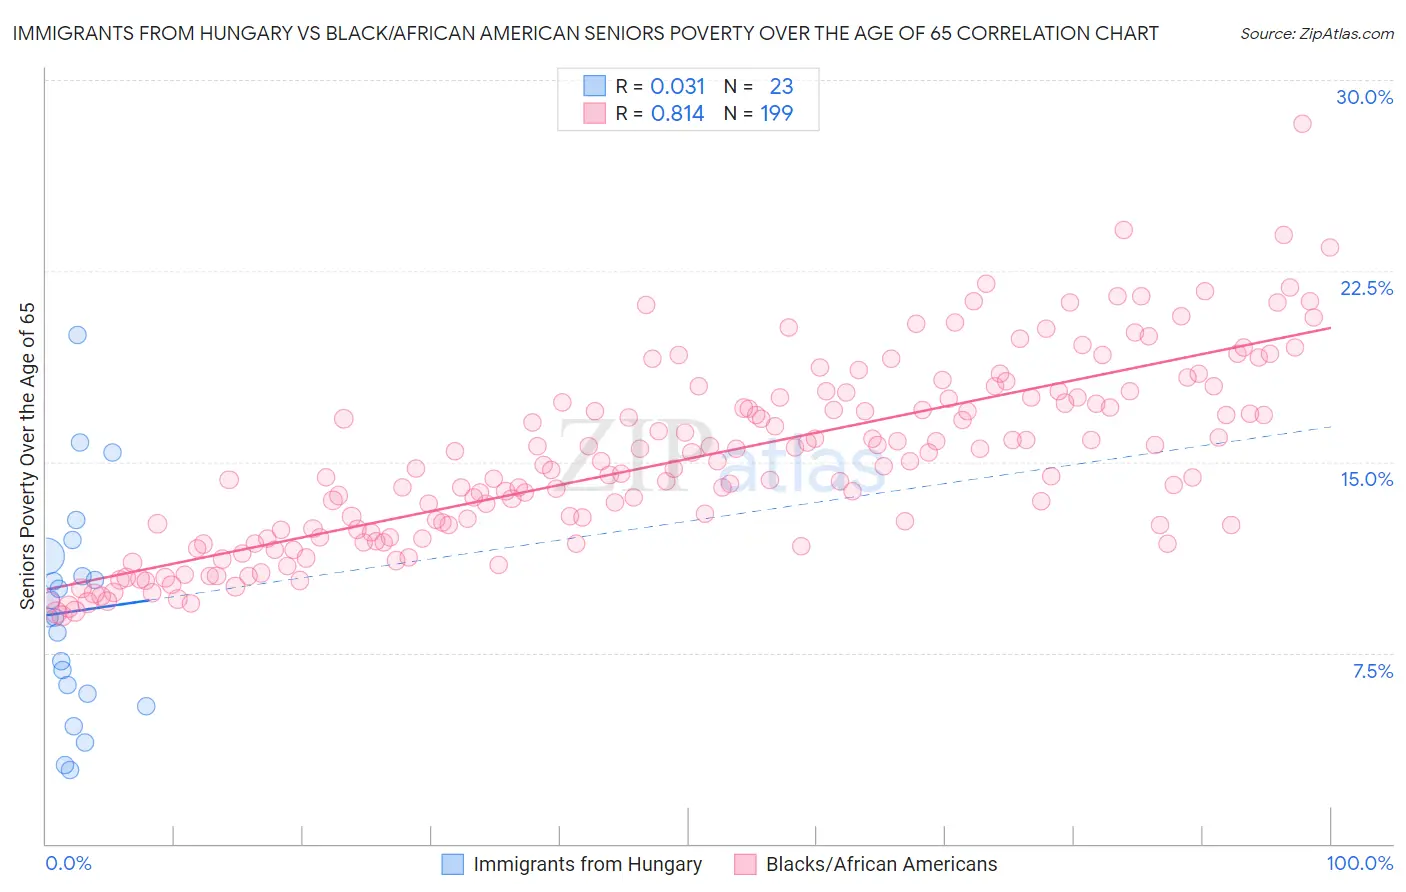 Immigrants from Hungary vs Black/African American Seniors Poverty Over the Age of 65